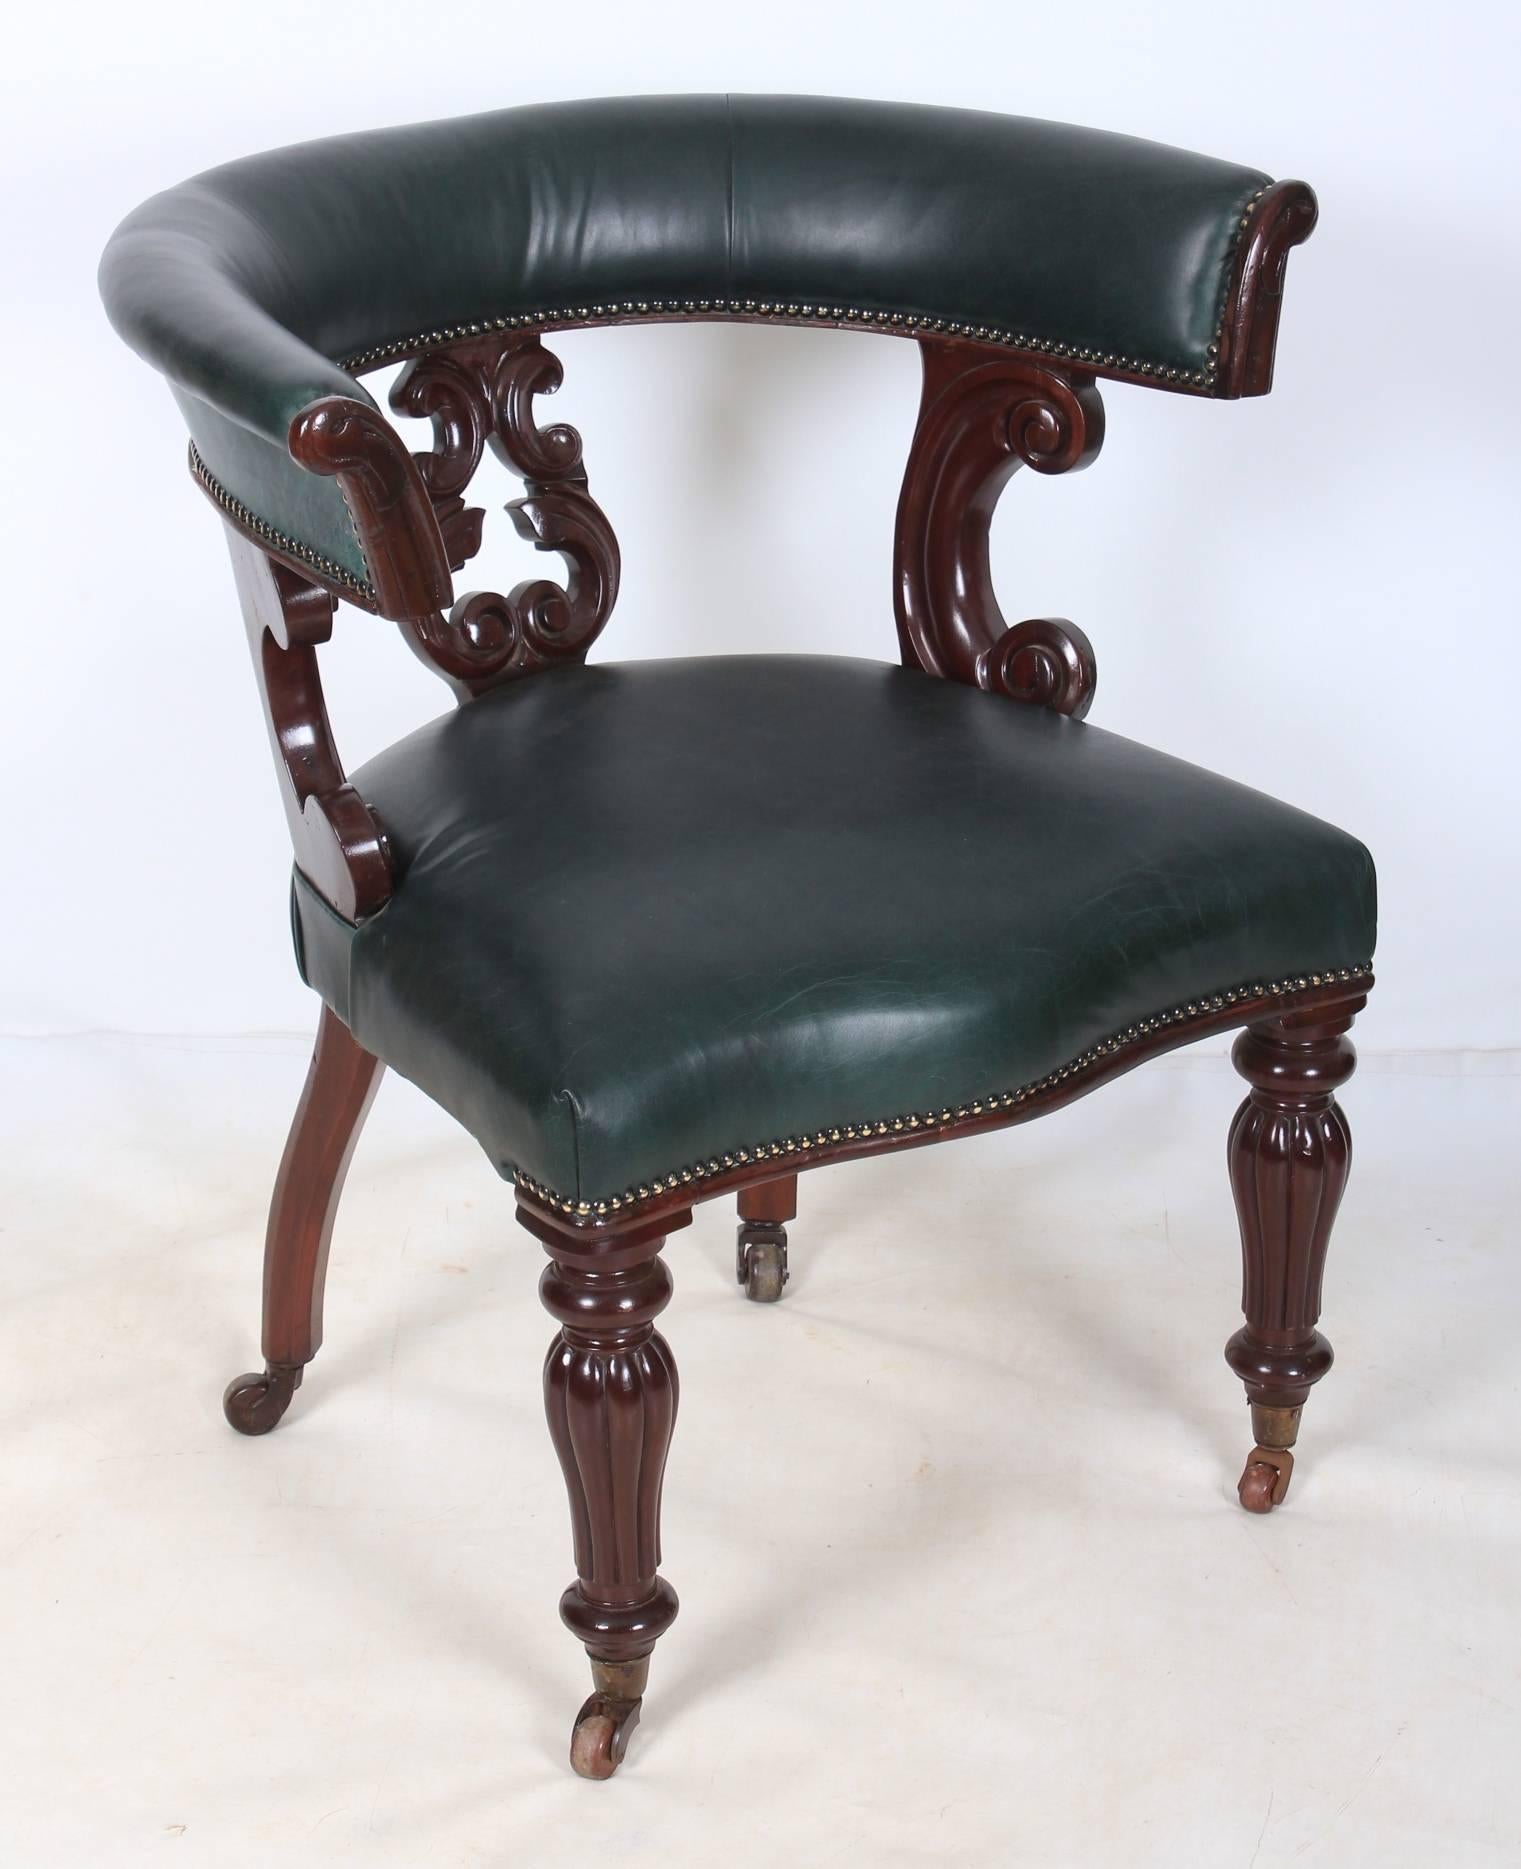 English, circa 1840.
Offered in superb showroom condition, this office desk chair has a dark green leather horse shoe back and seat.
Good quality scroll carvings along the back and beautiful shaped reeded legs on casters.
A lovely chair, ready